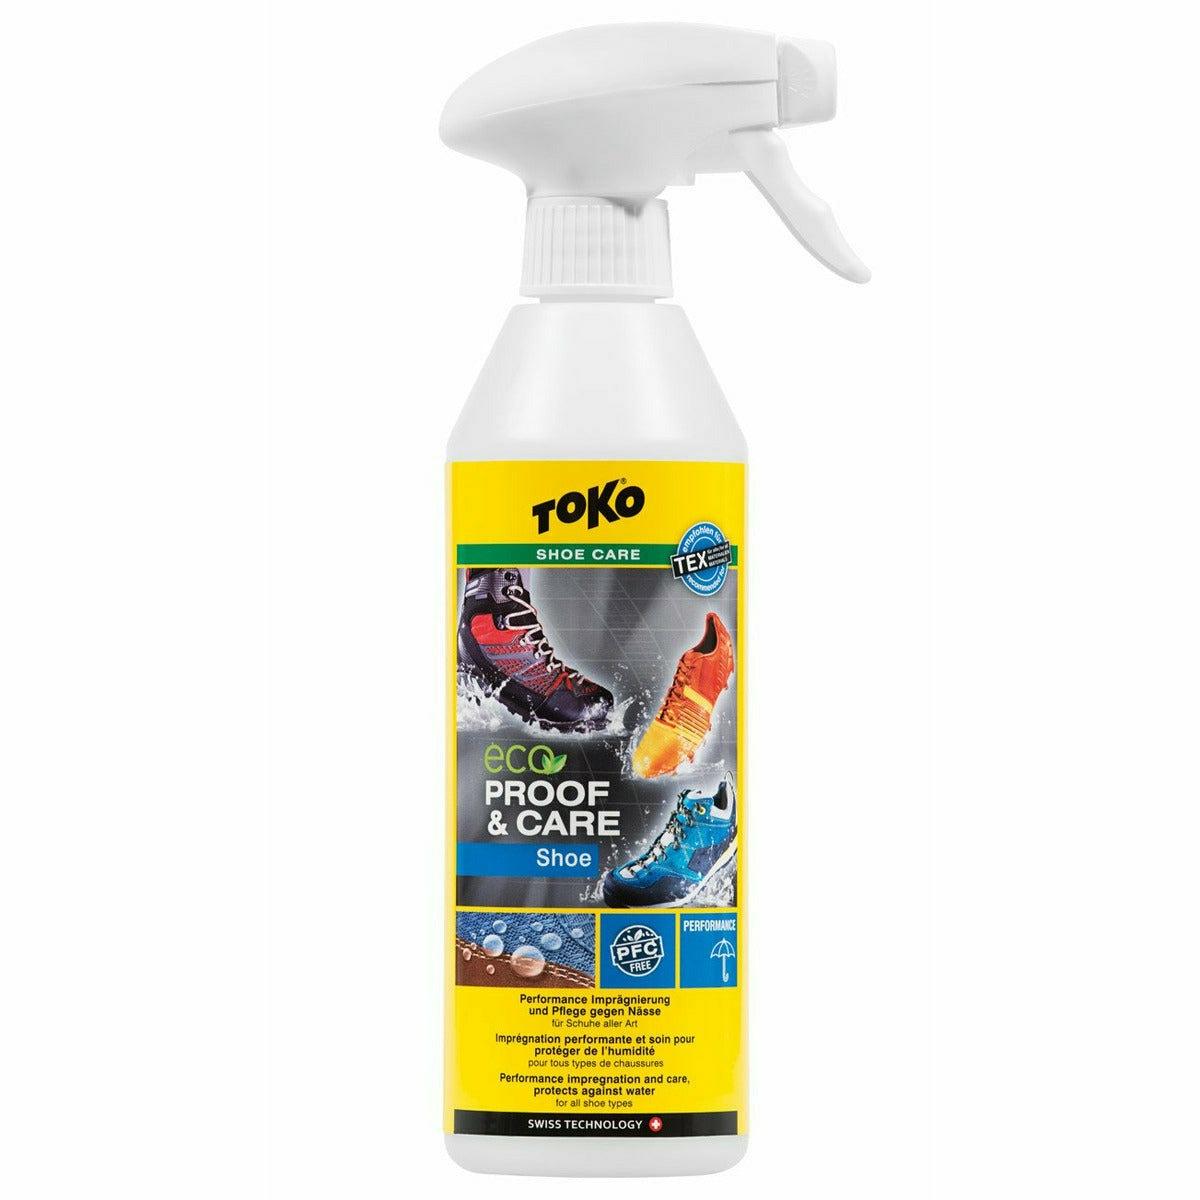 TOKO Shoe Proof & Care 500ml im Outlet Sale